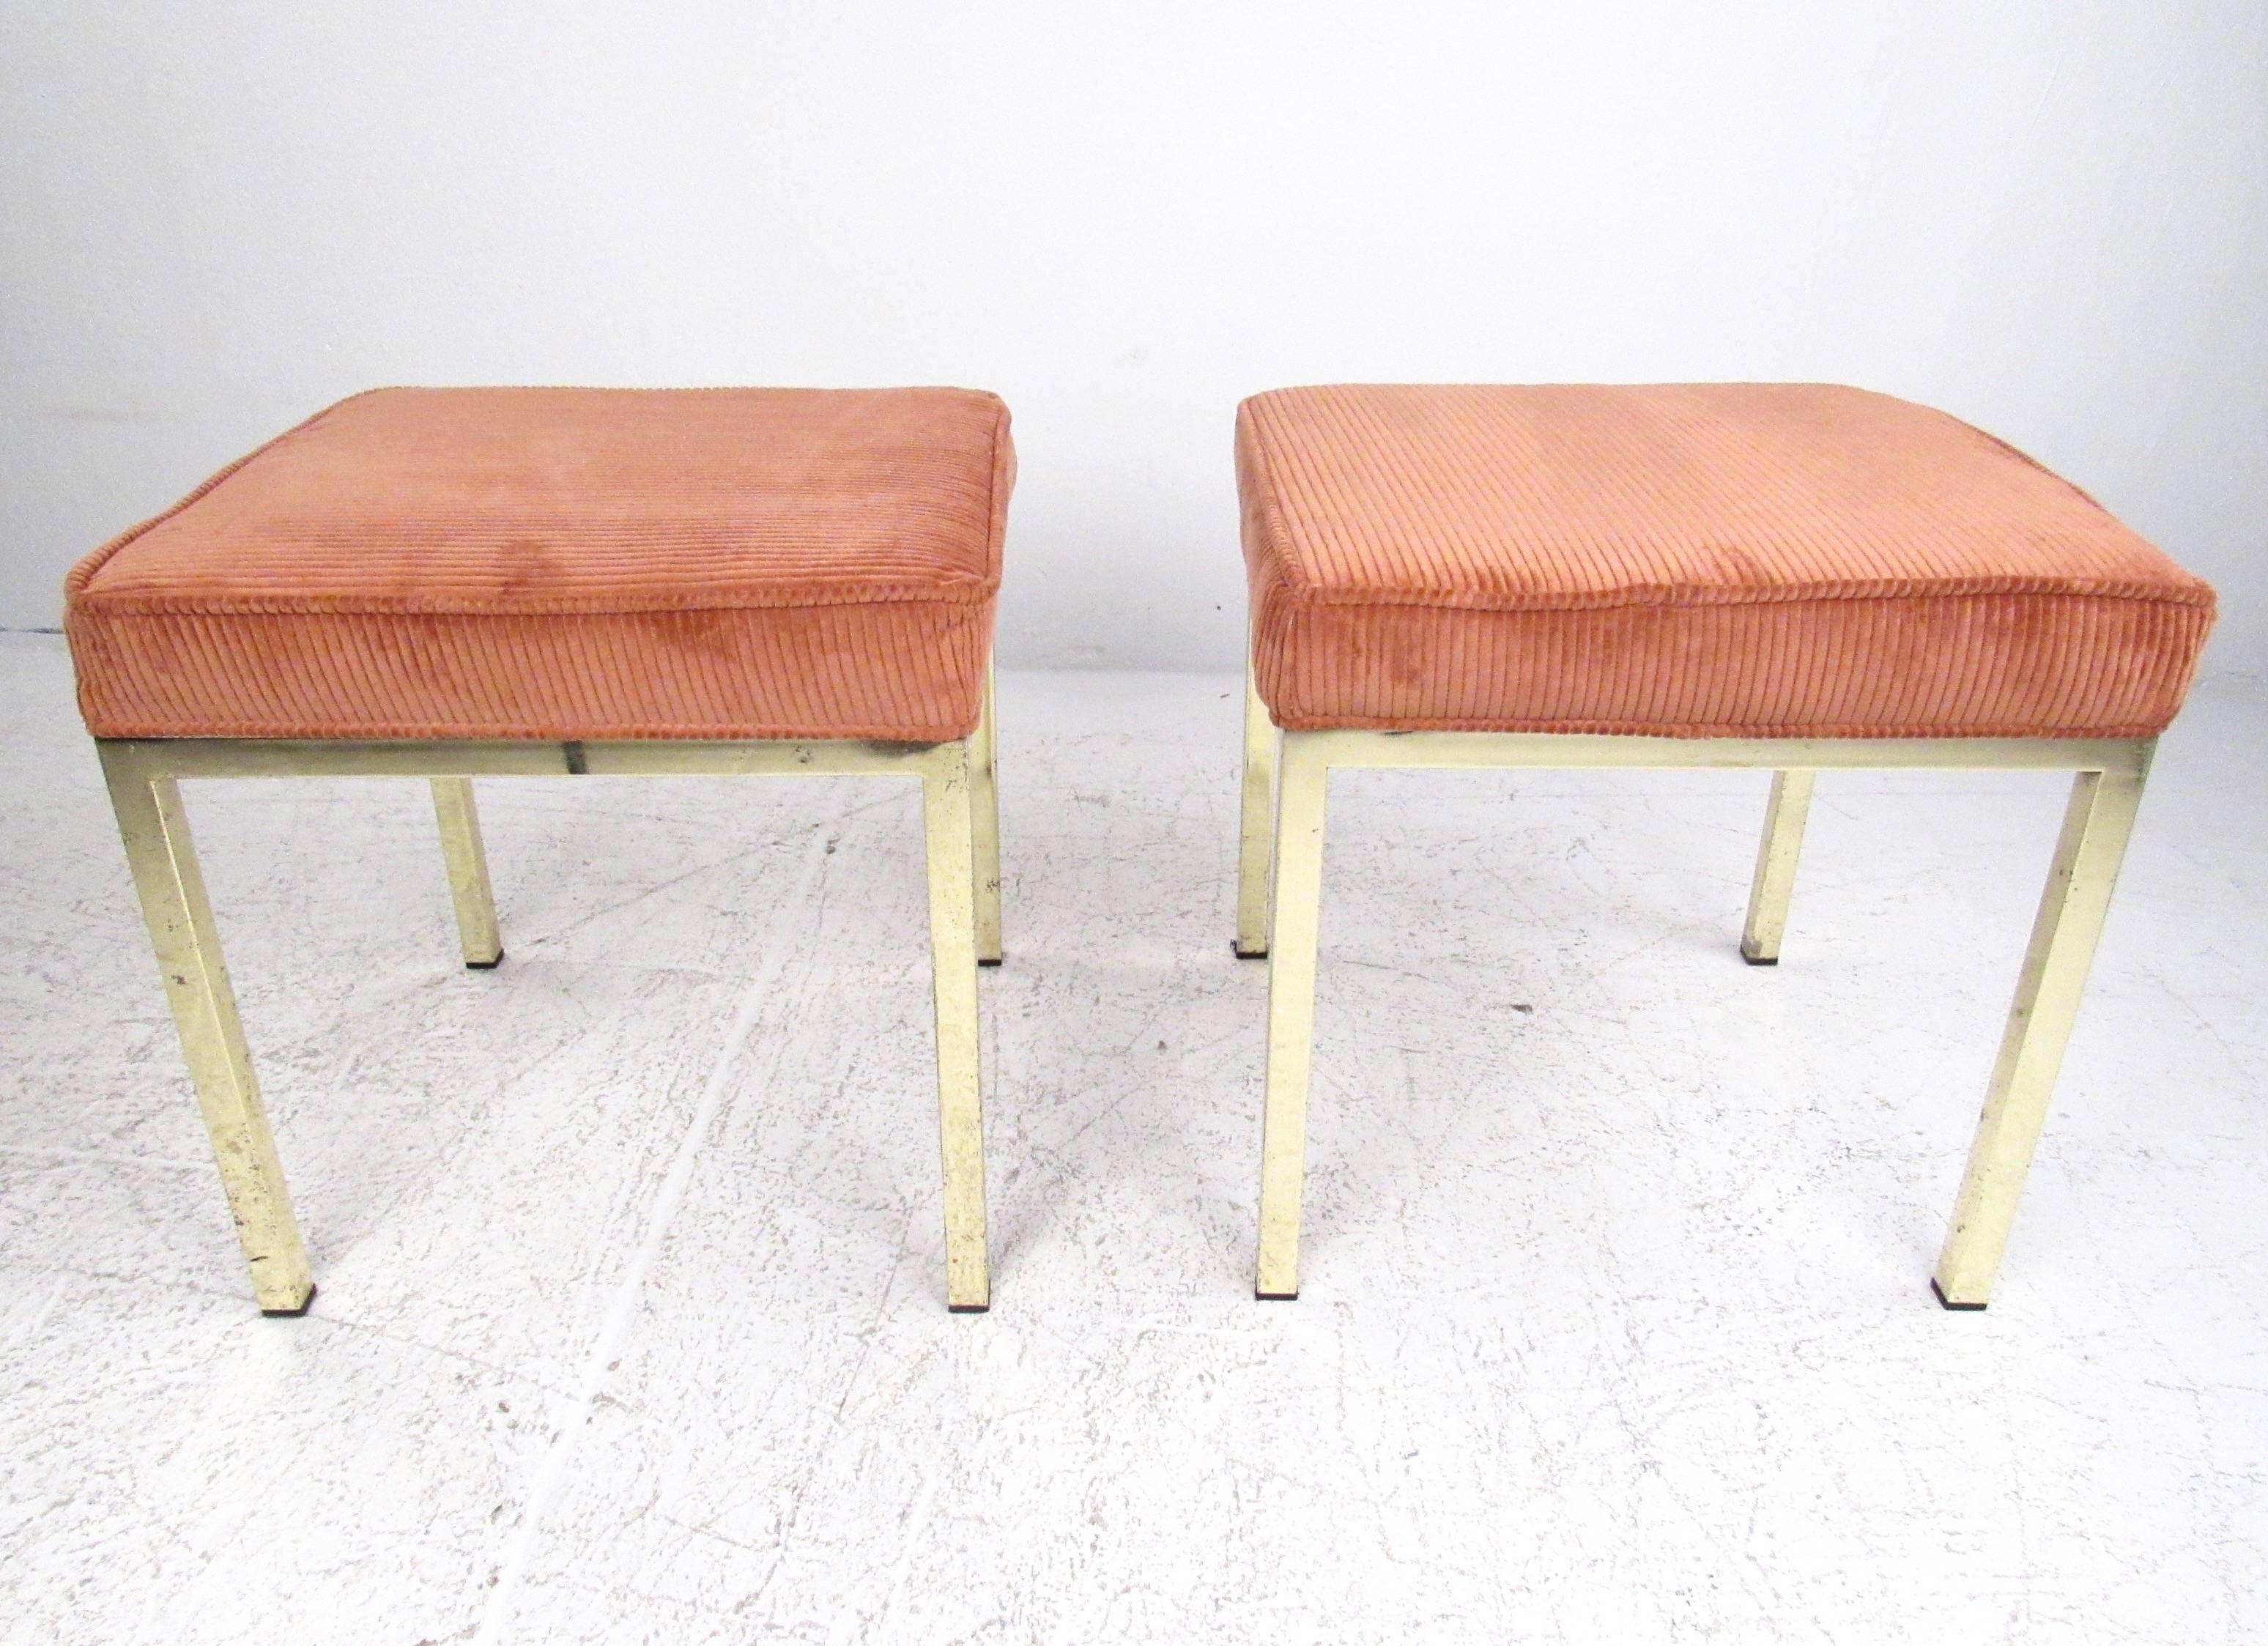 This pair of brass base decorators stools makes a stylish vintage addition to any setting, for use as occasional seating or as side stools. The ribbed fabric features piping along the edges and provides a stylish complimentary texture to the vintage